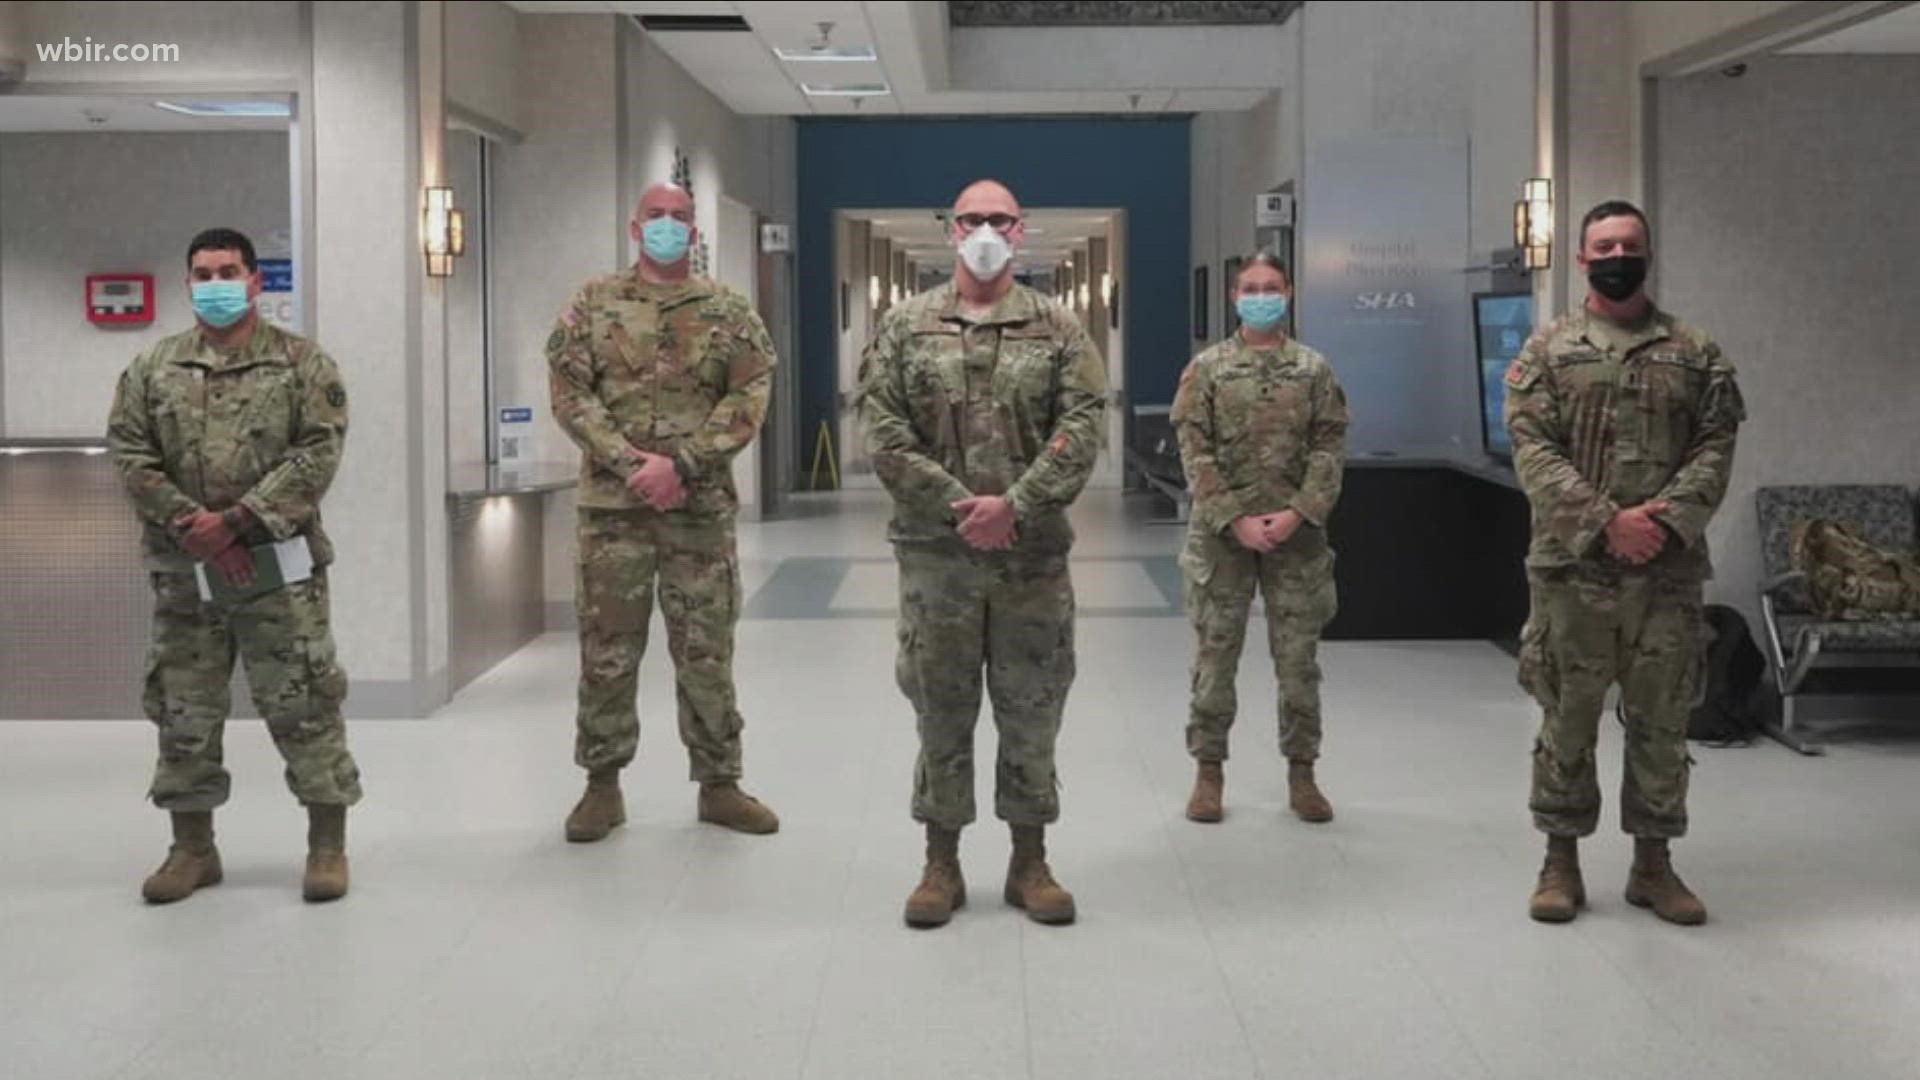 More National Guard members are helping East Tennessee hospitals manage COVID-19 patients.